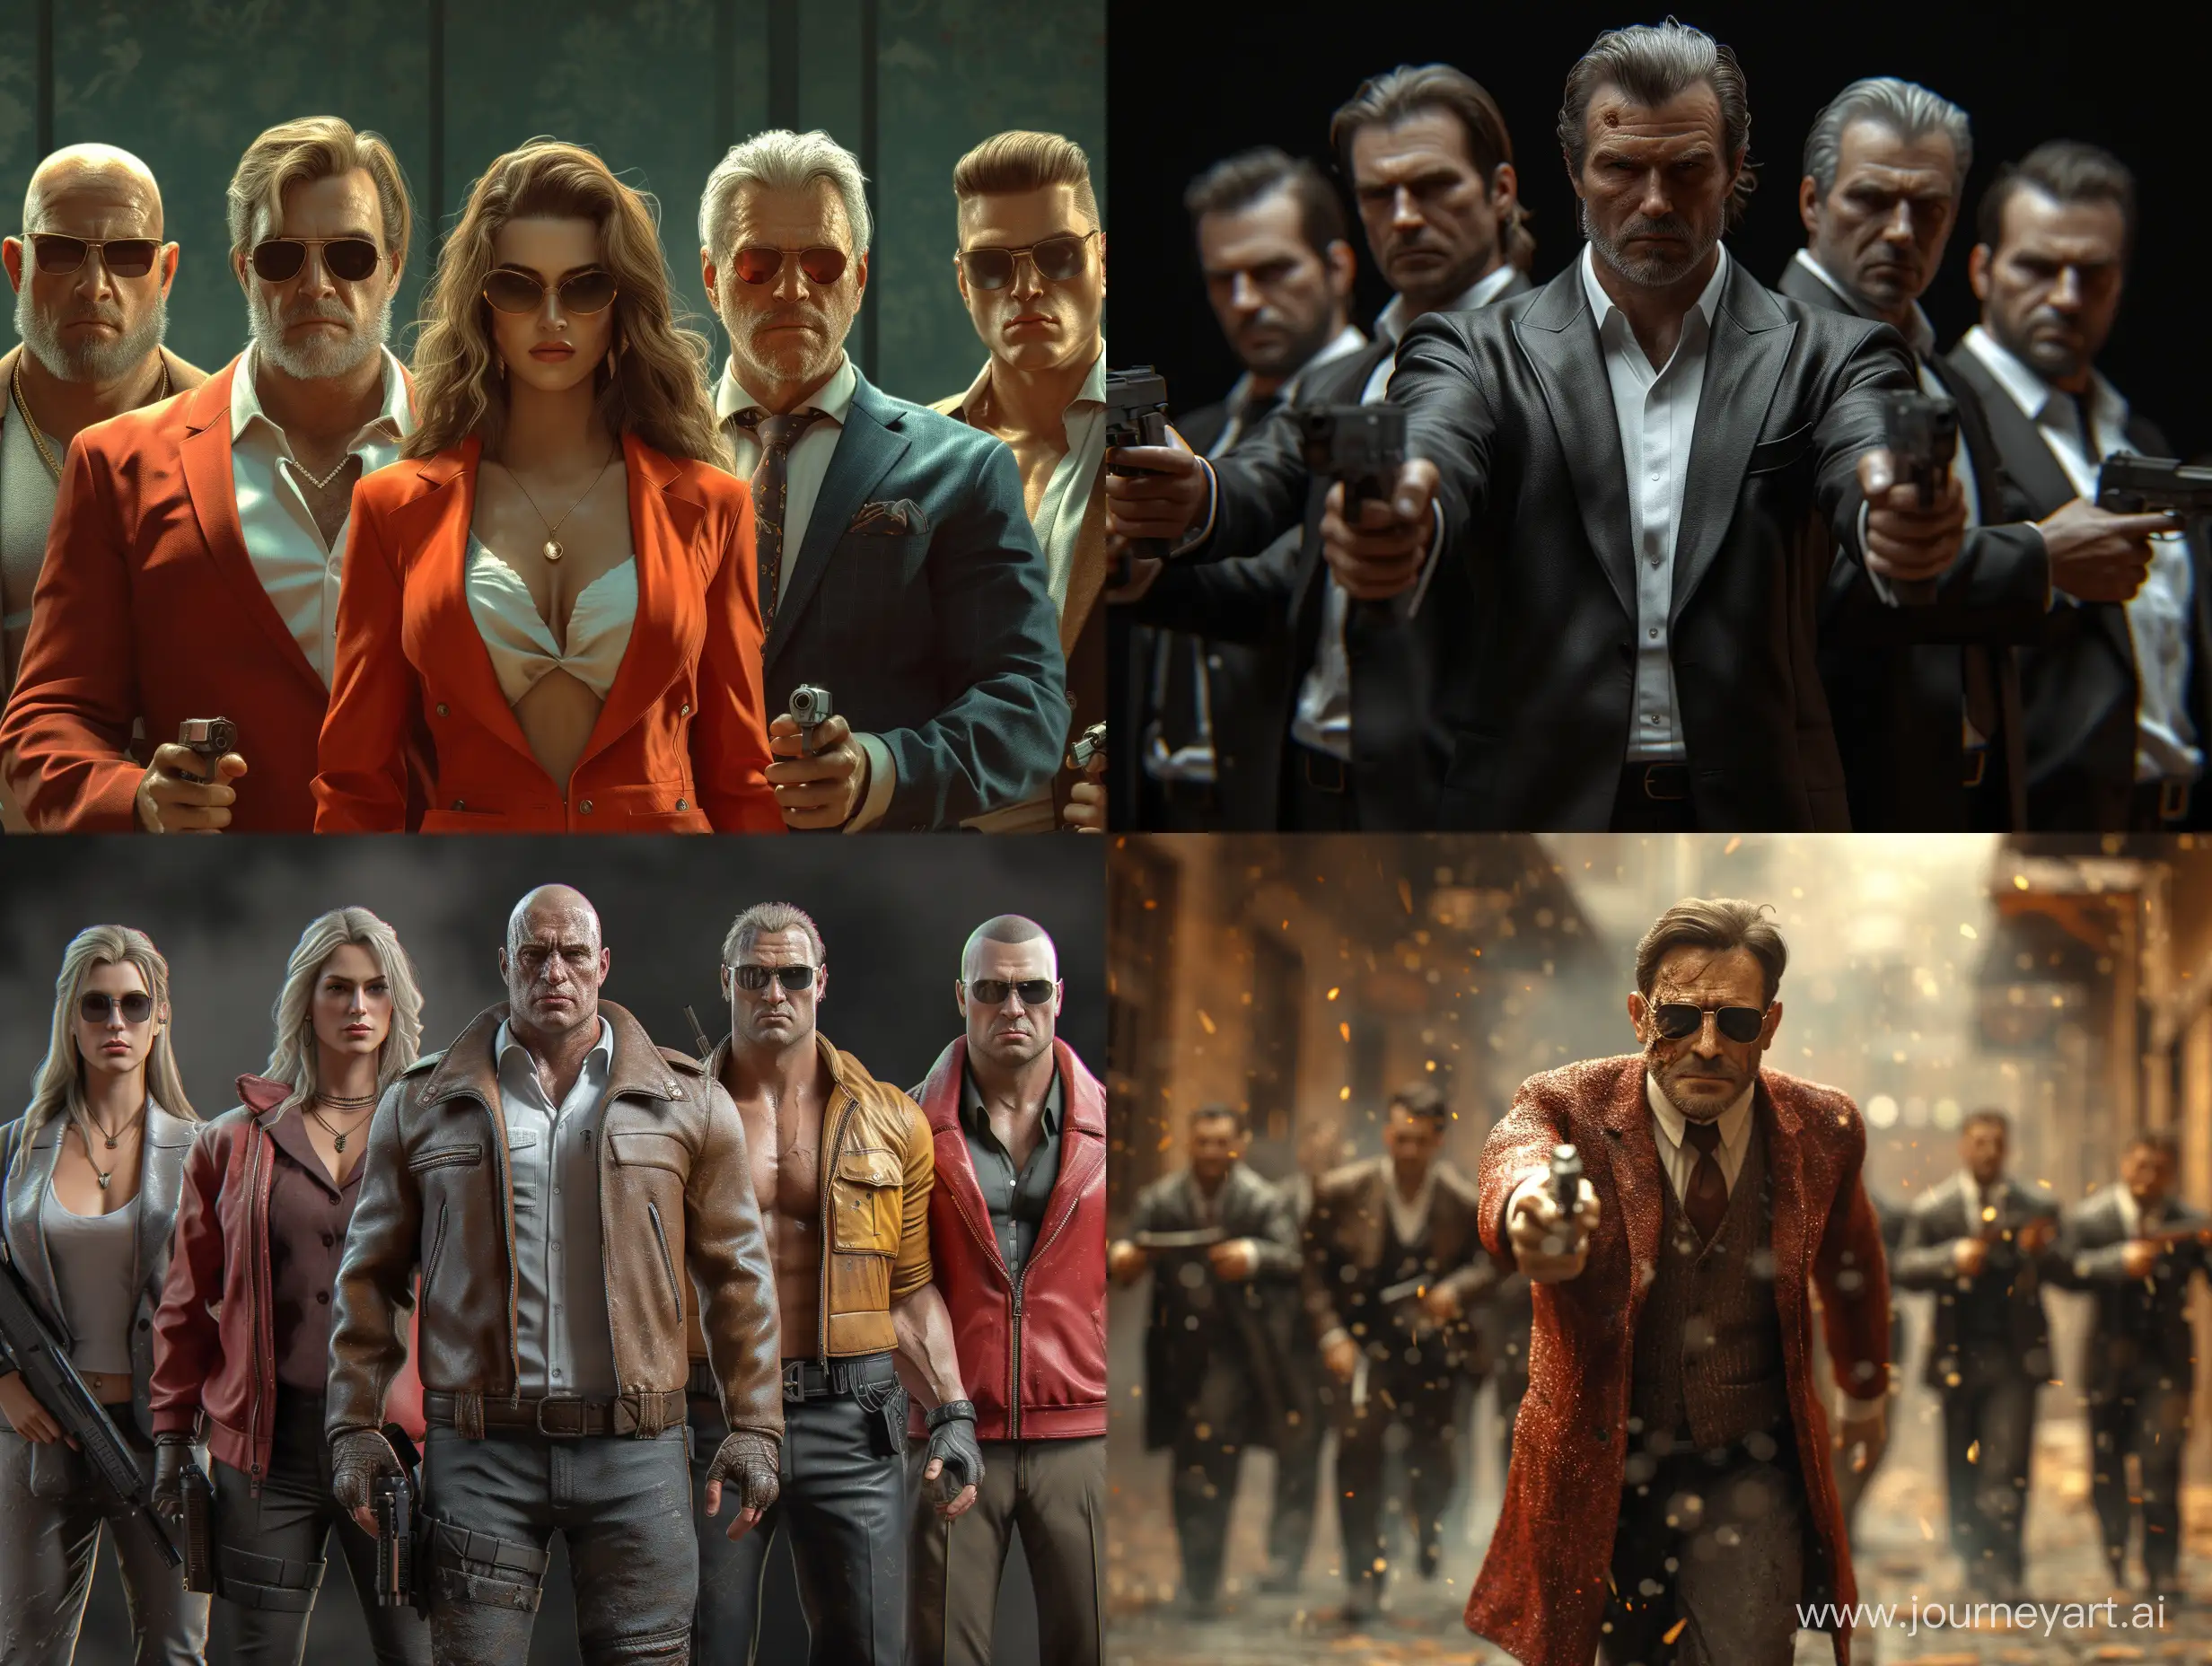 The developer and three senior managers along with the senior supervisor and five supervisors are preparing the new version of Mafiatime. hyper ultra realistic action with hyper realistic skin details. Cinematic action pose. --v 6.0 --s 250